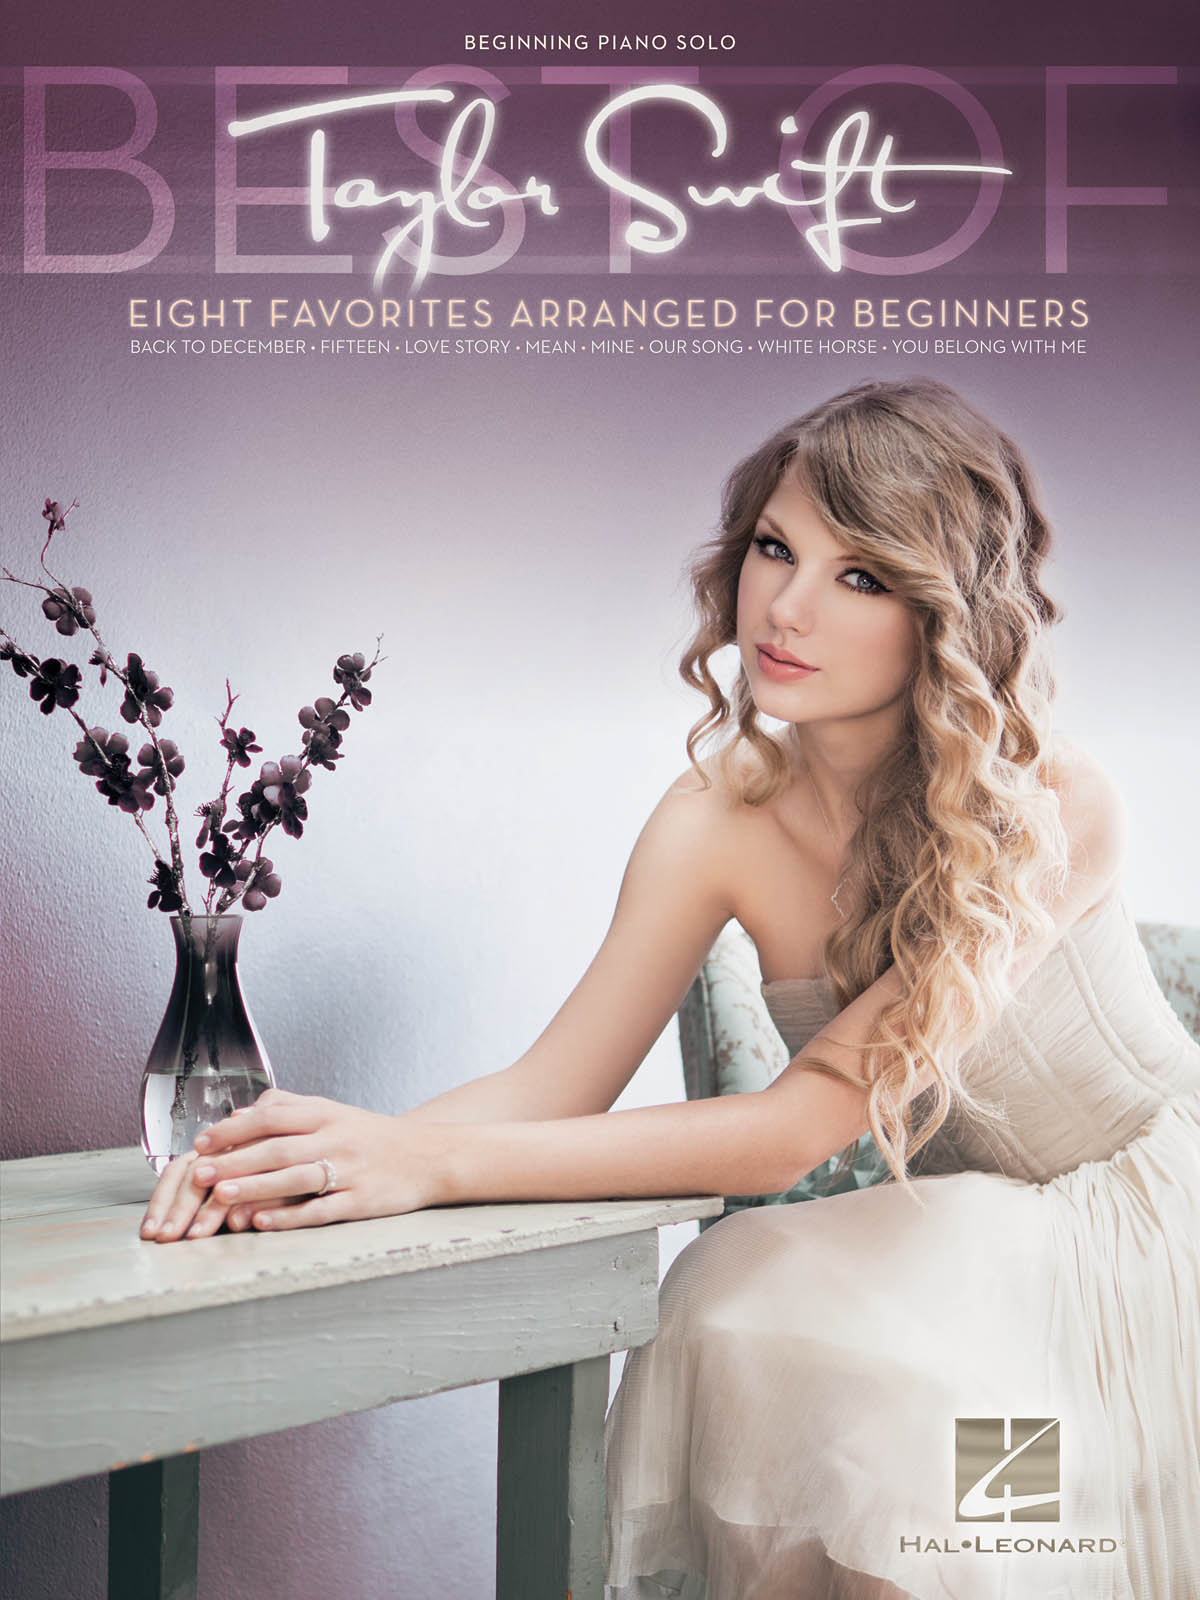 Beginning Piano Solo Songbook Taylor Swift